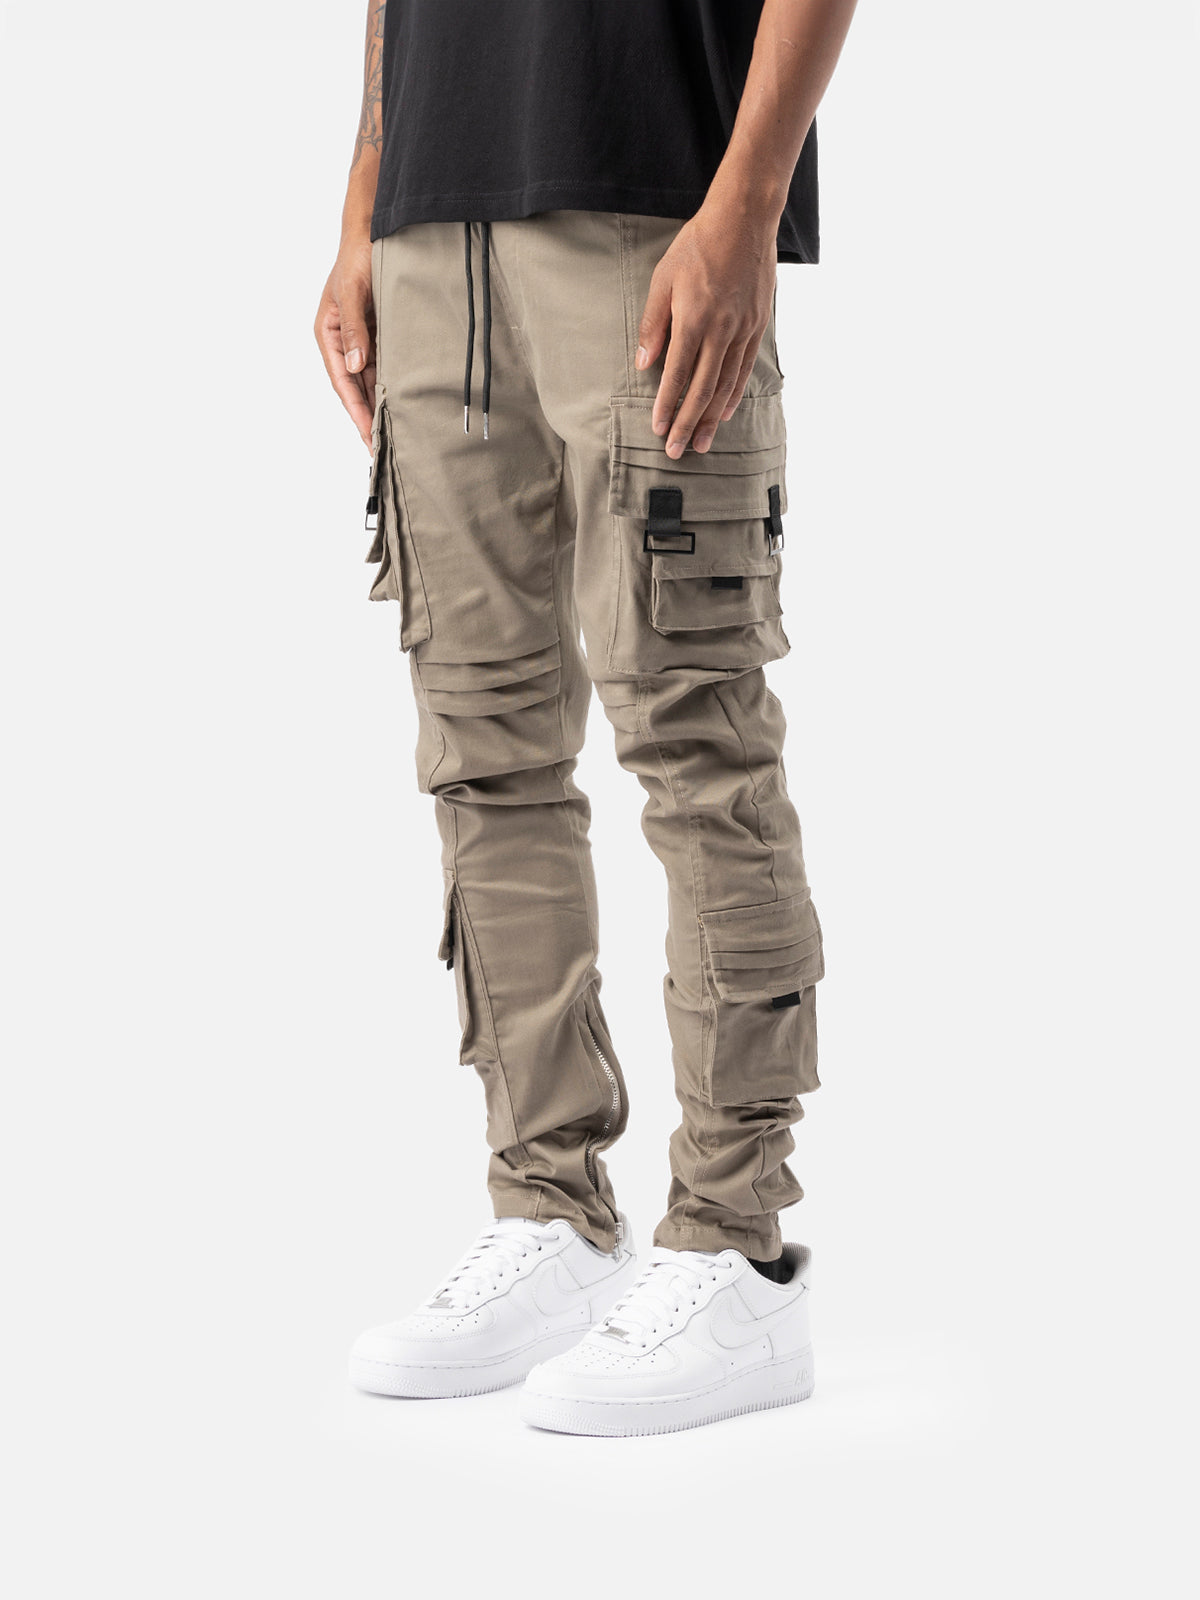 How To Style Cargo Pants. Nike.com